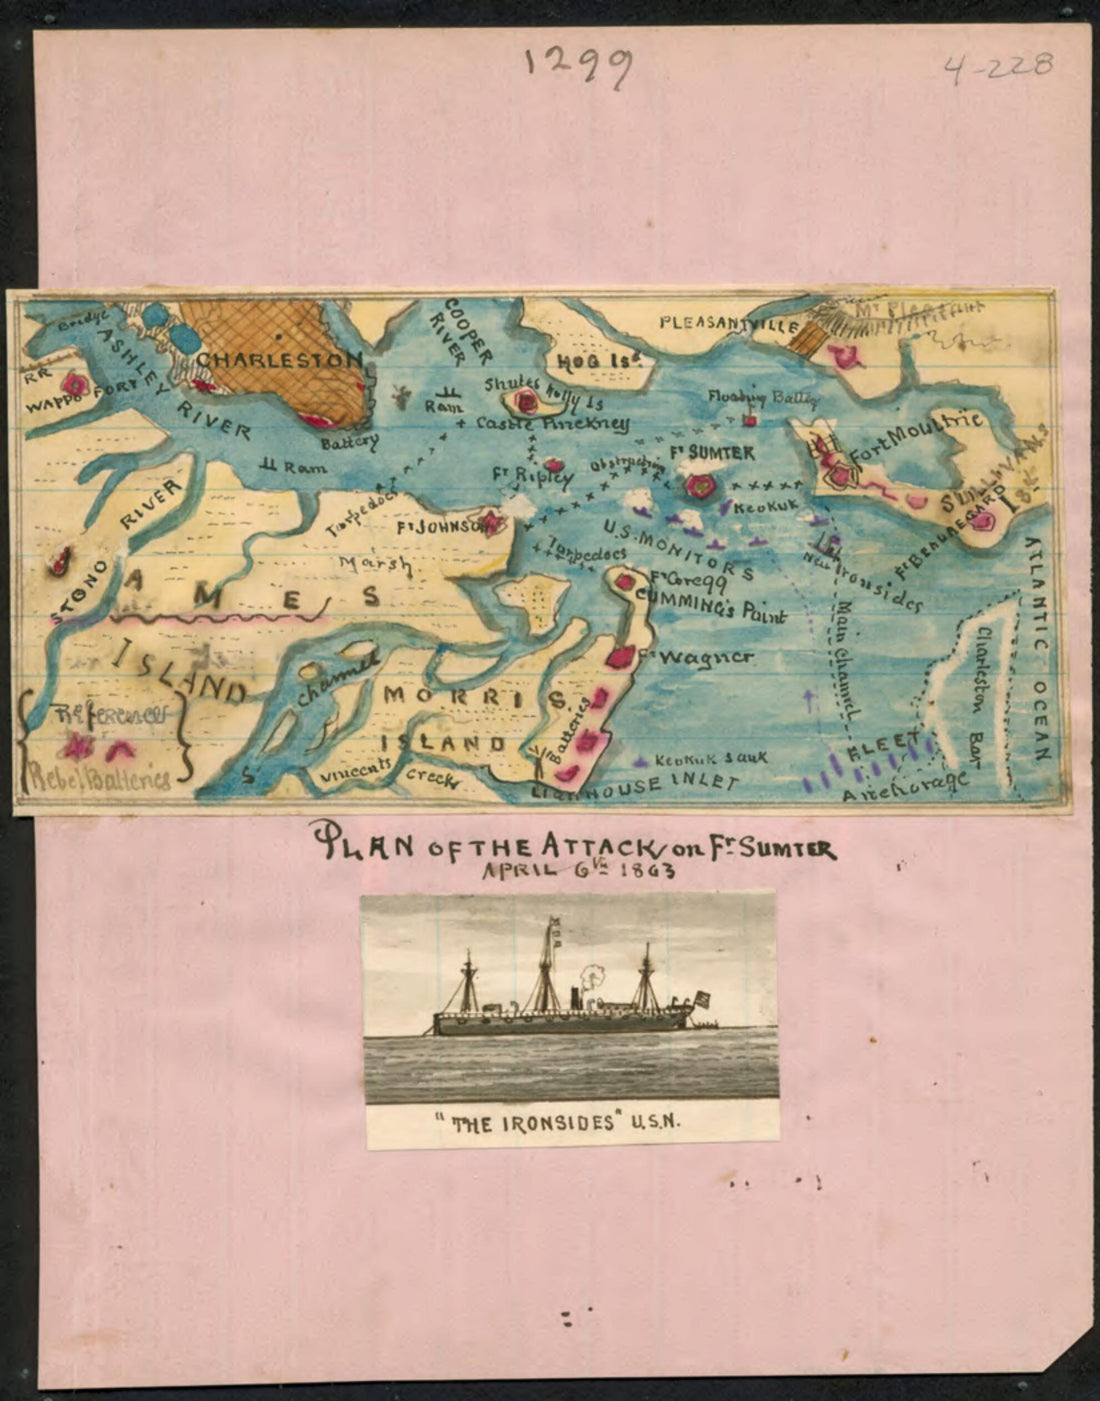 This old map of Plan of the Attack On Ft. Sumter, April 6th, 1863 from 04-06 was created by Robert Knox Sneden in 04-06